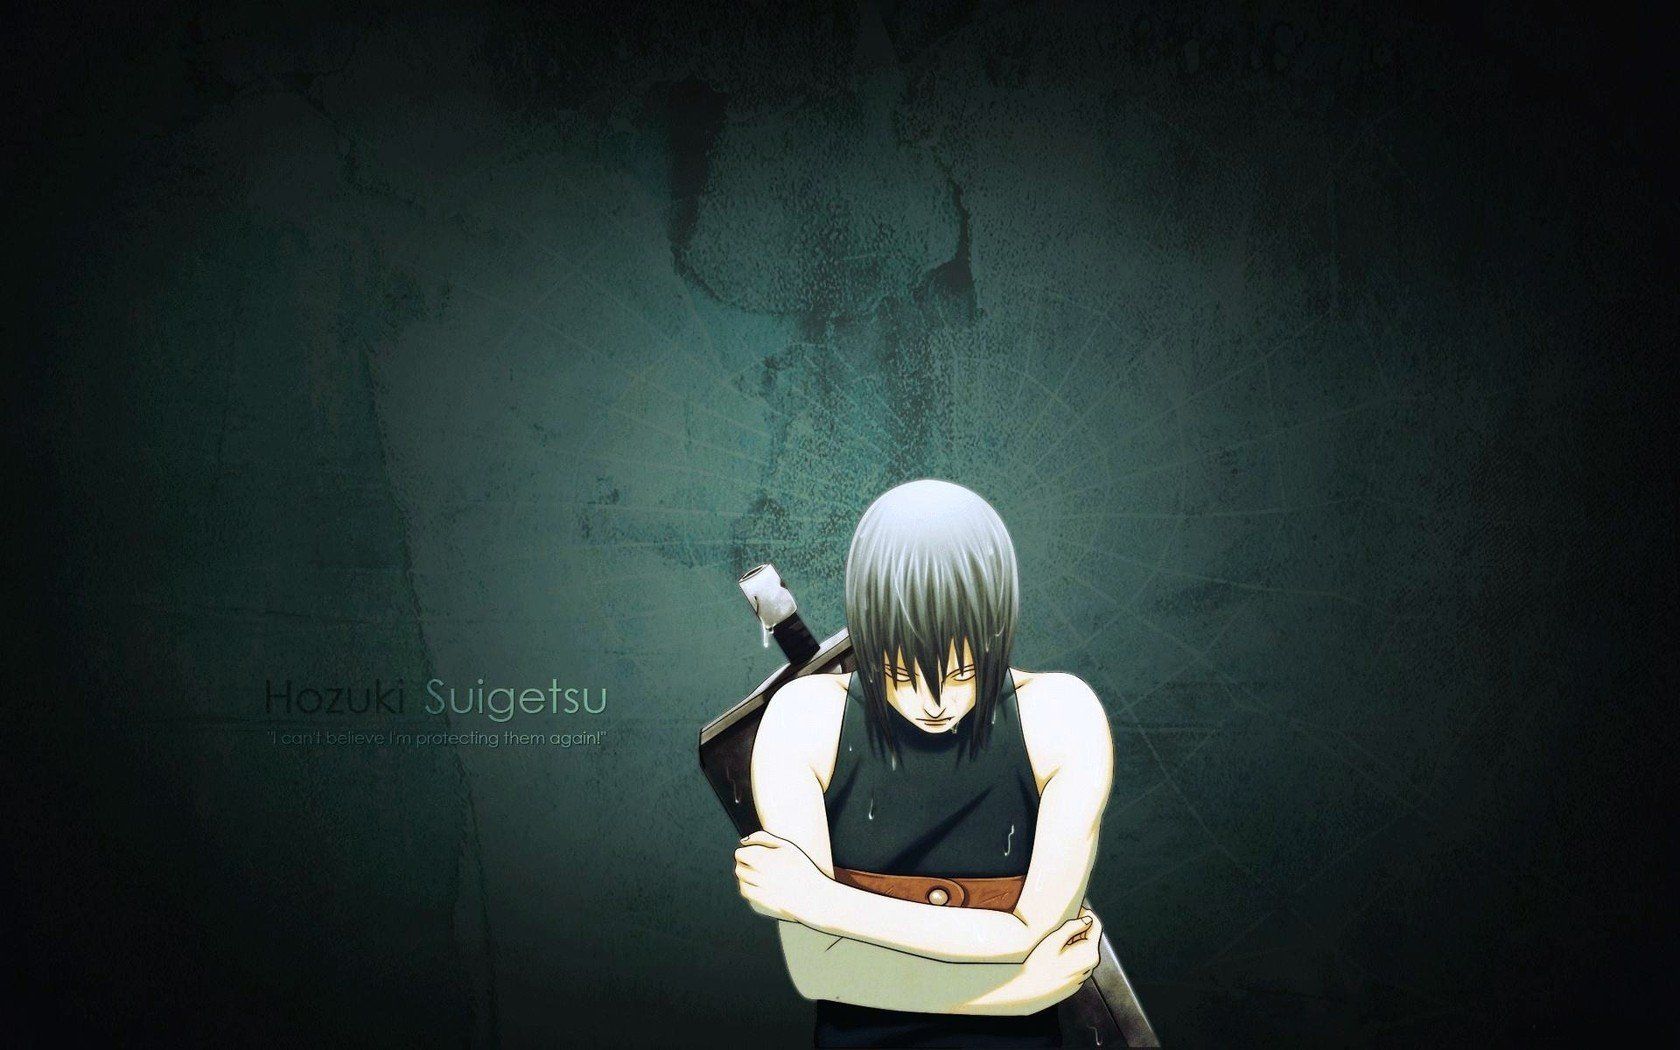 Quotes Naruto: Shippuden water drops anime boys closed eyes protecting dark background green background arms crossed Suigetsu Hozuki silver hair wallpaperx1050